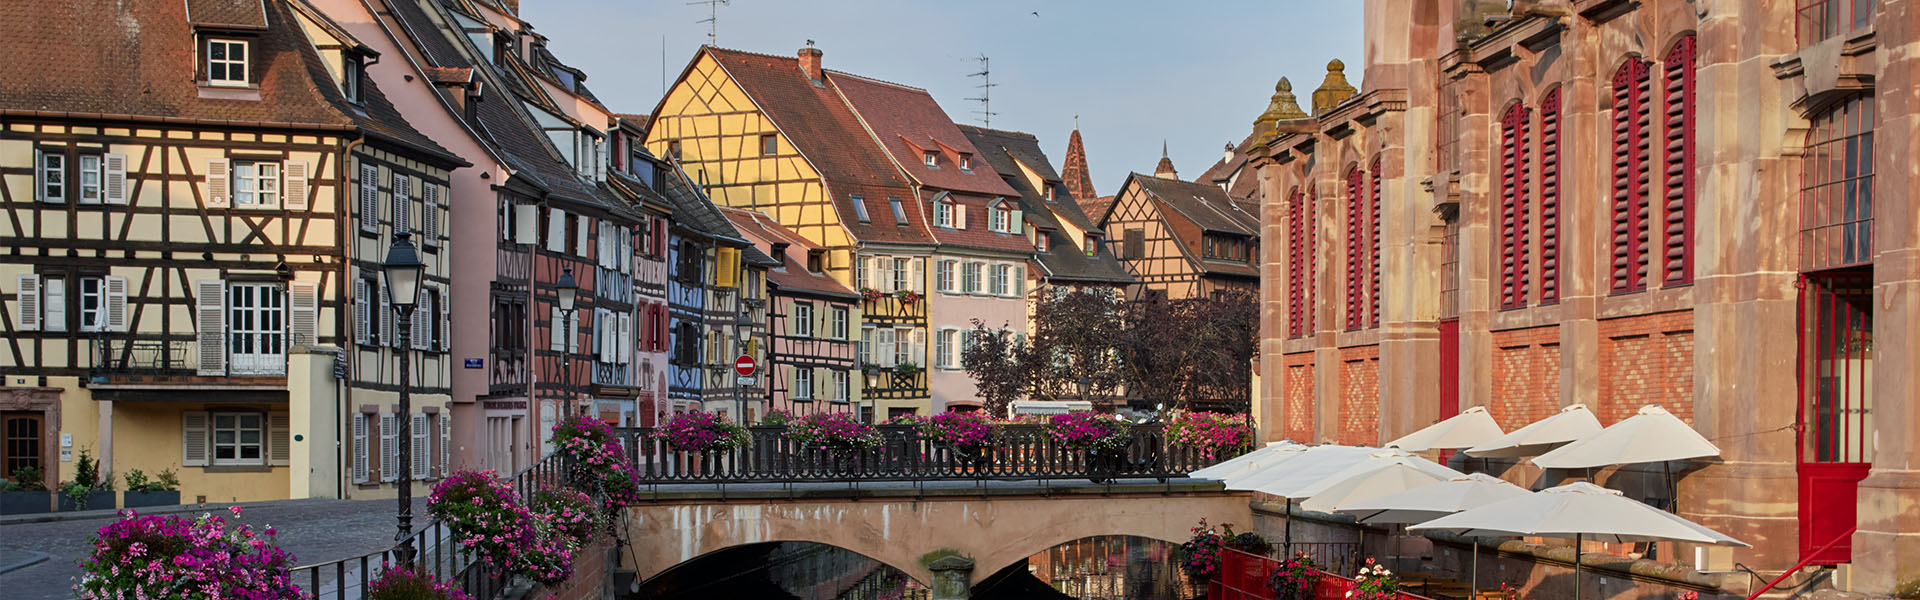 Alsace river view with historial buildings